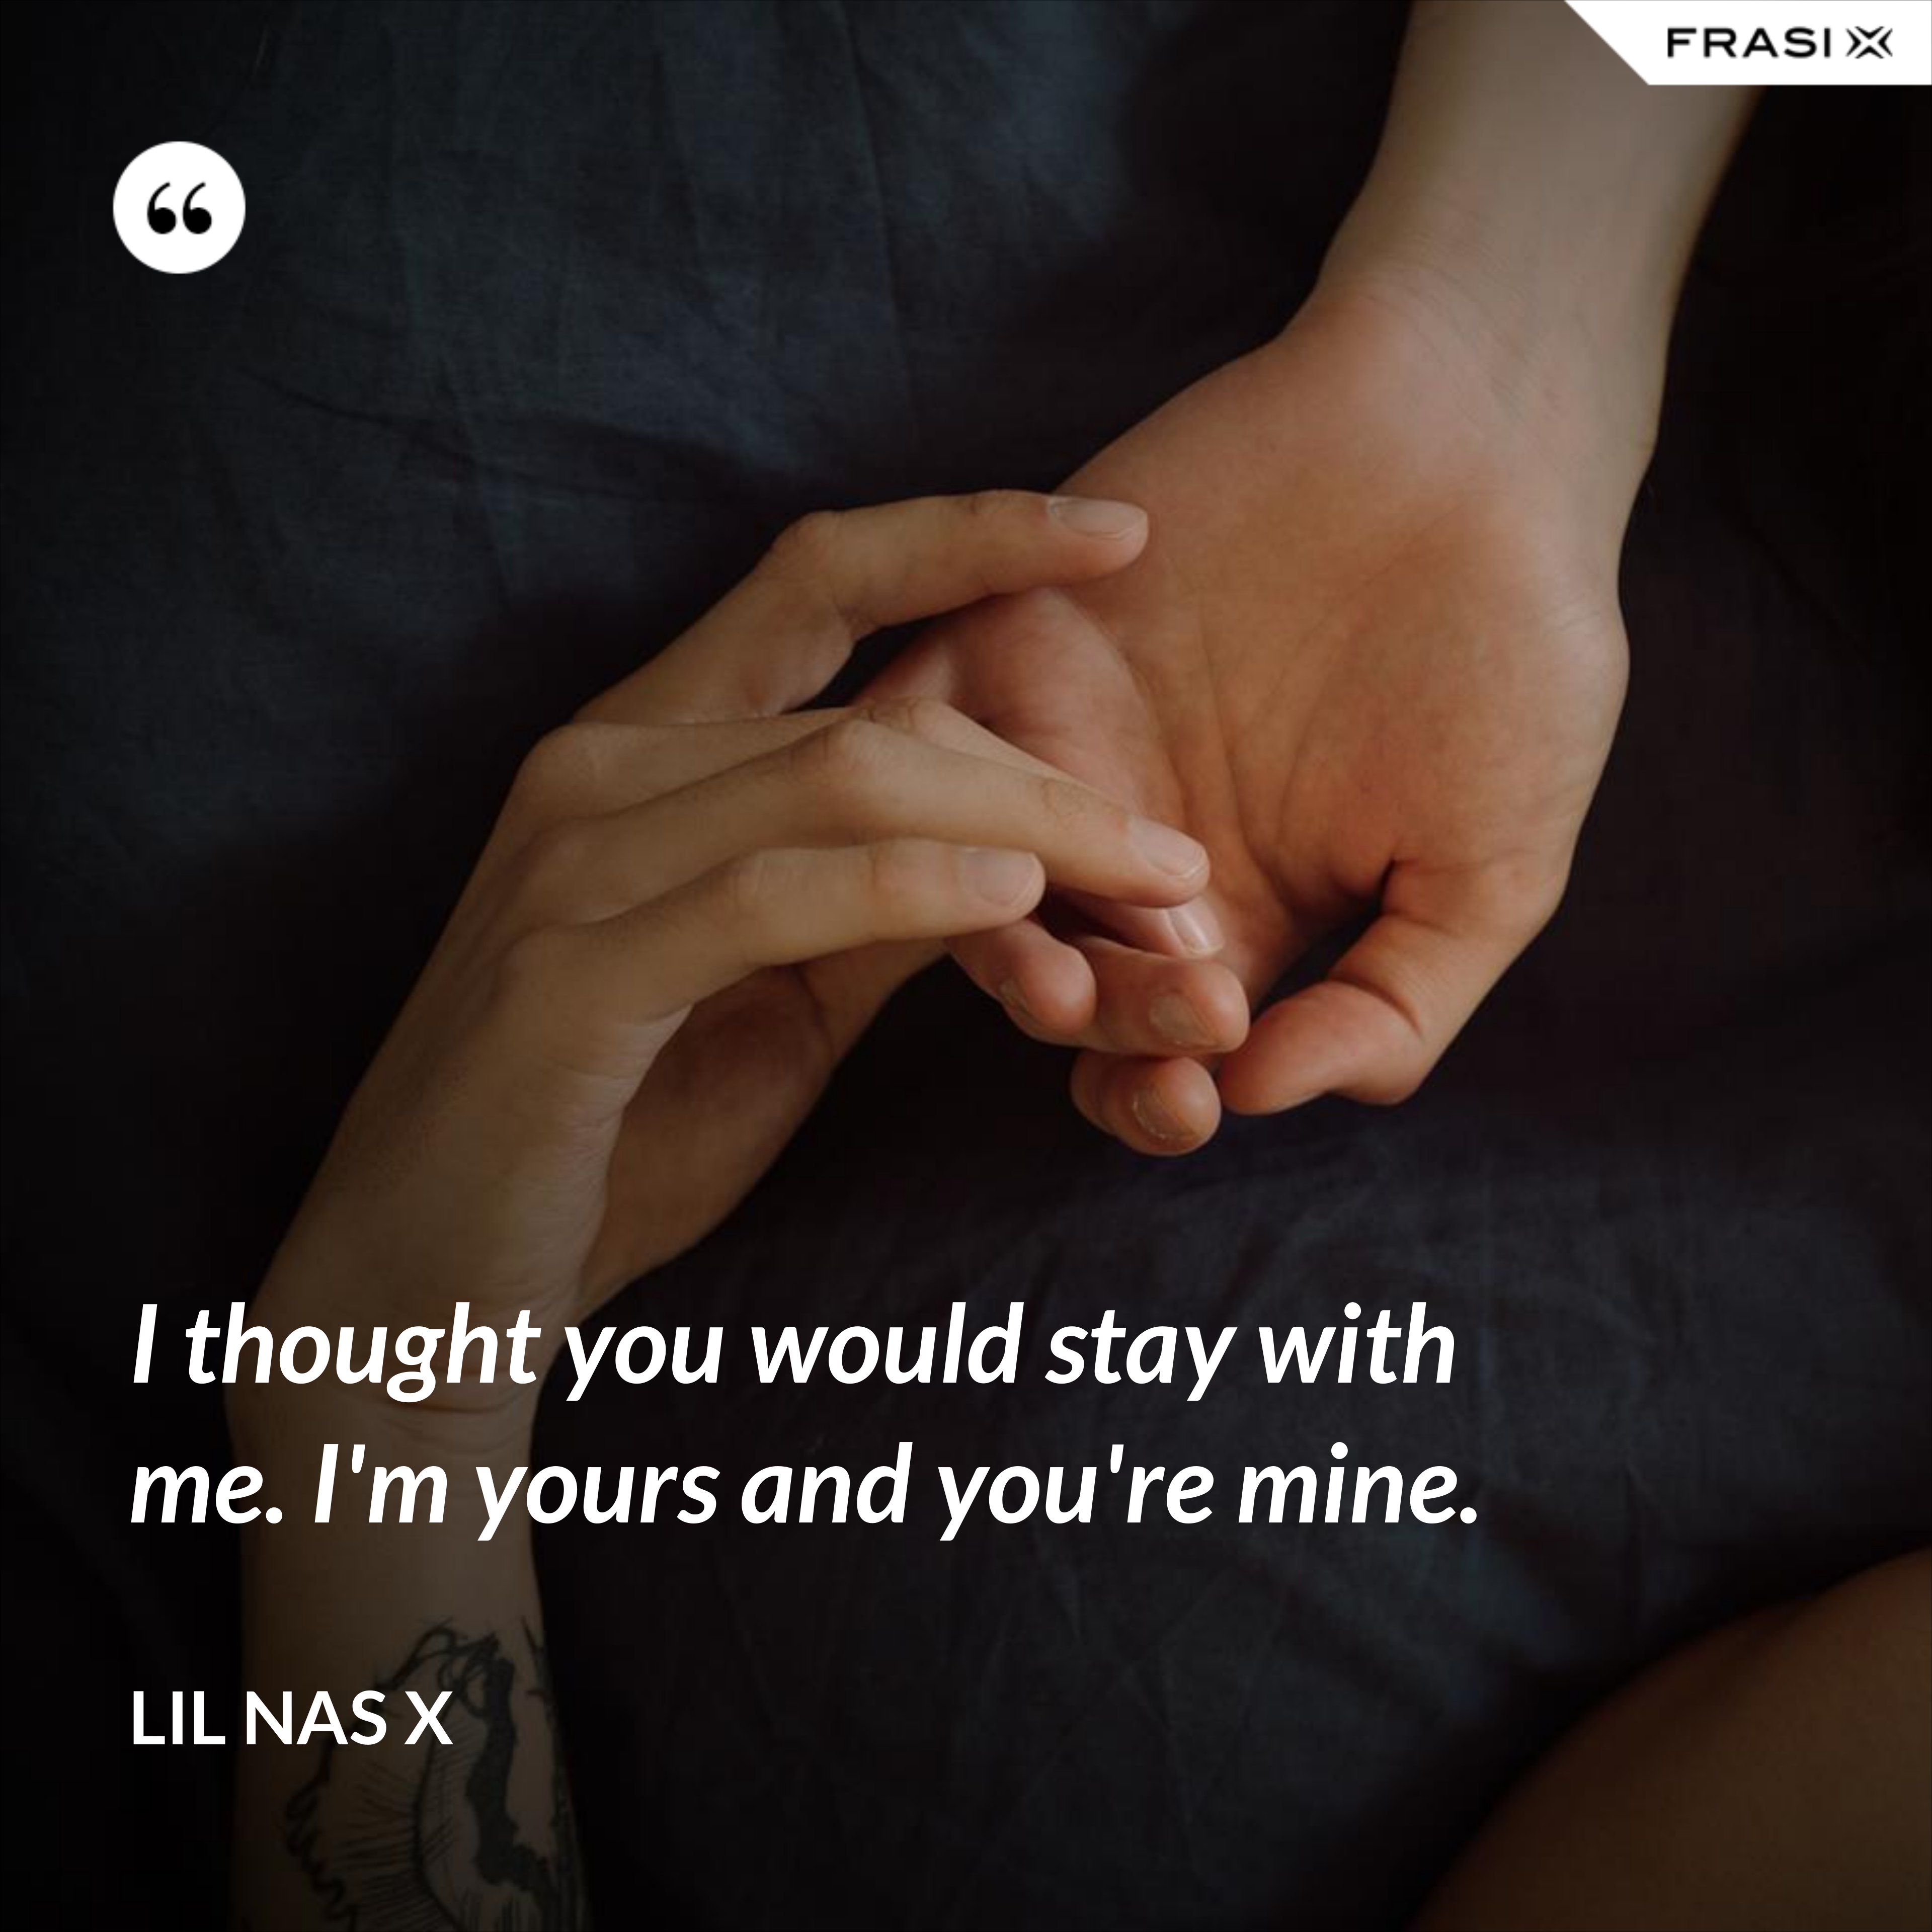 I thought you would stay with me. I'm yours and you're mine. - Lil Nas X